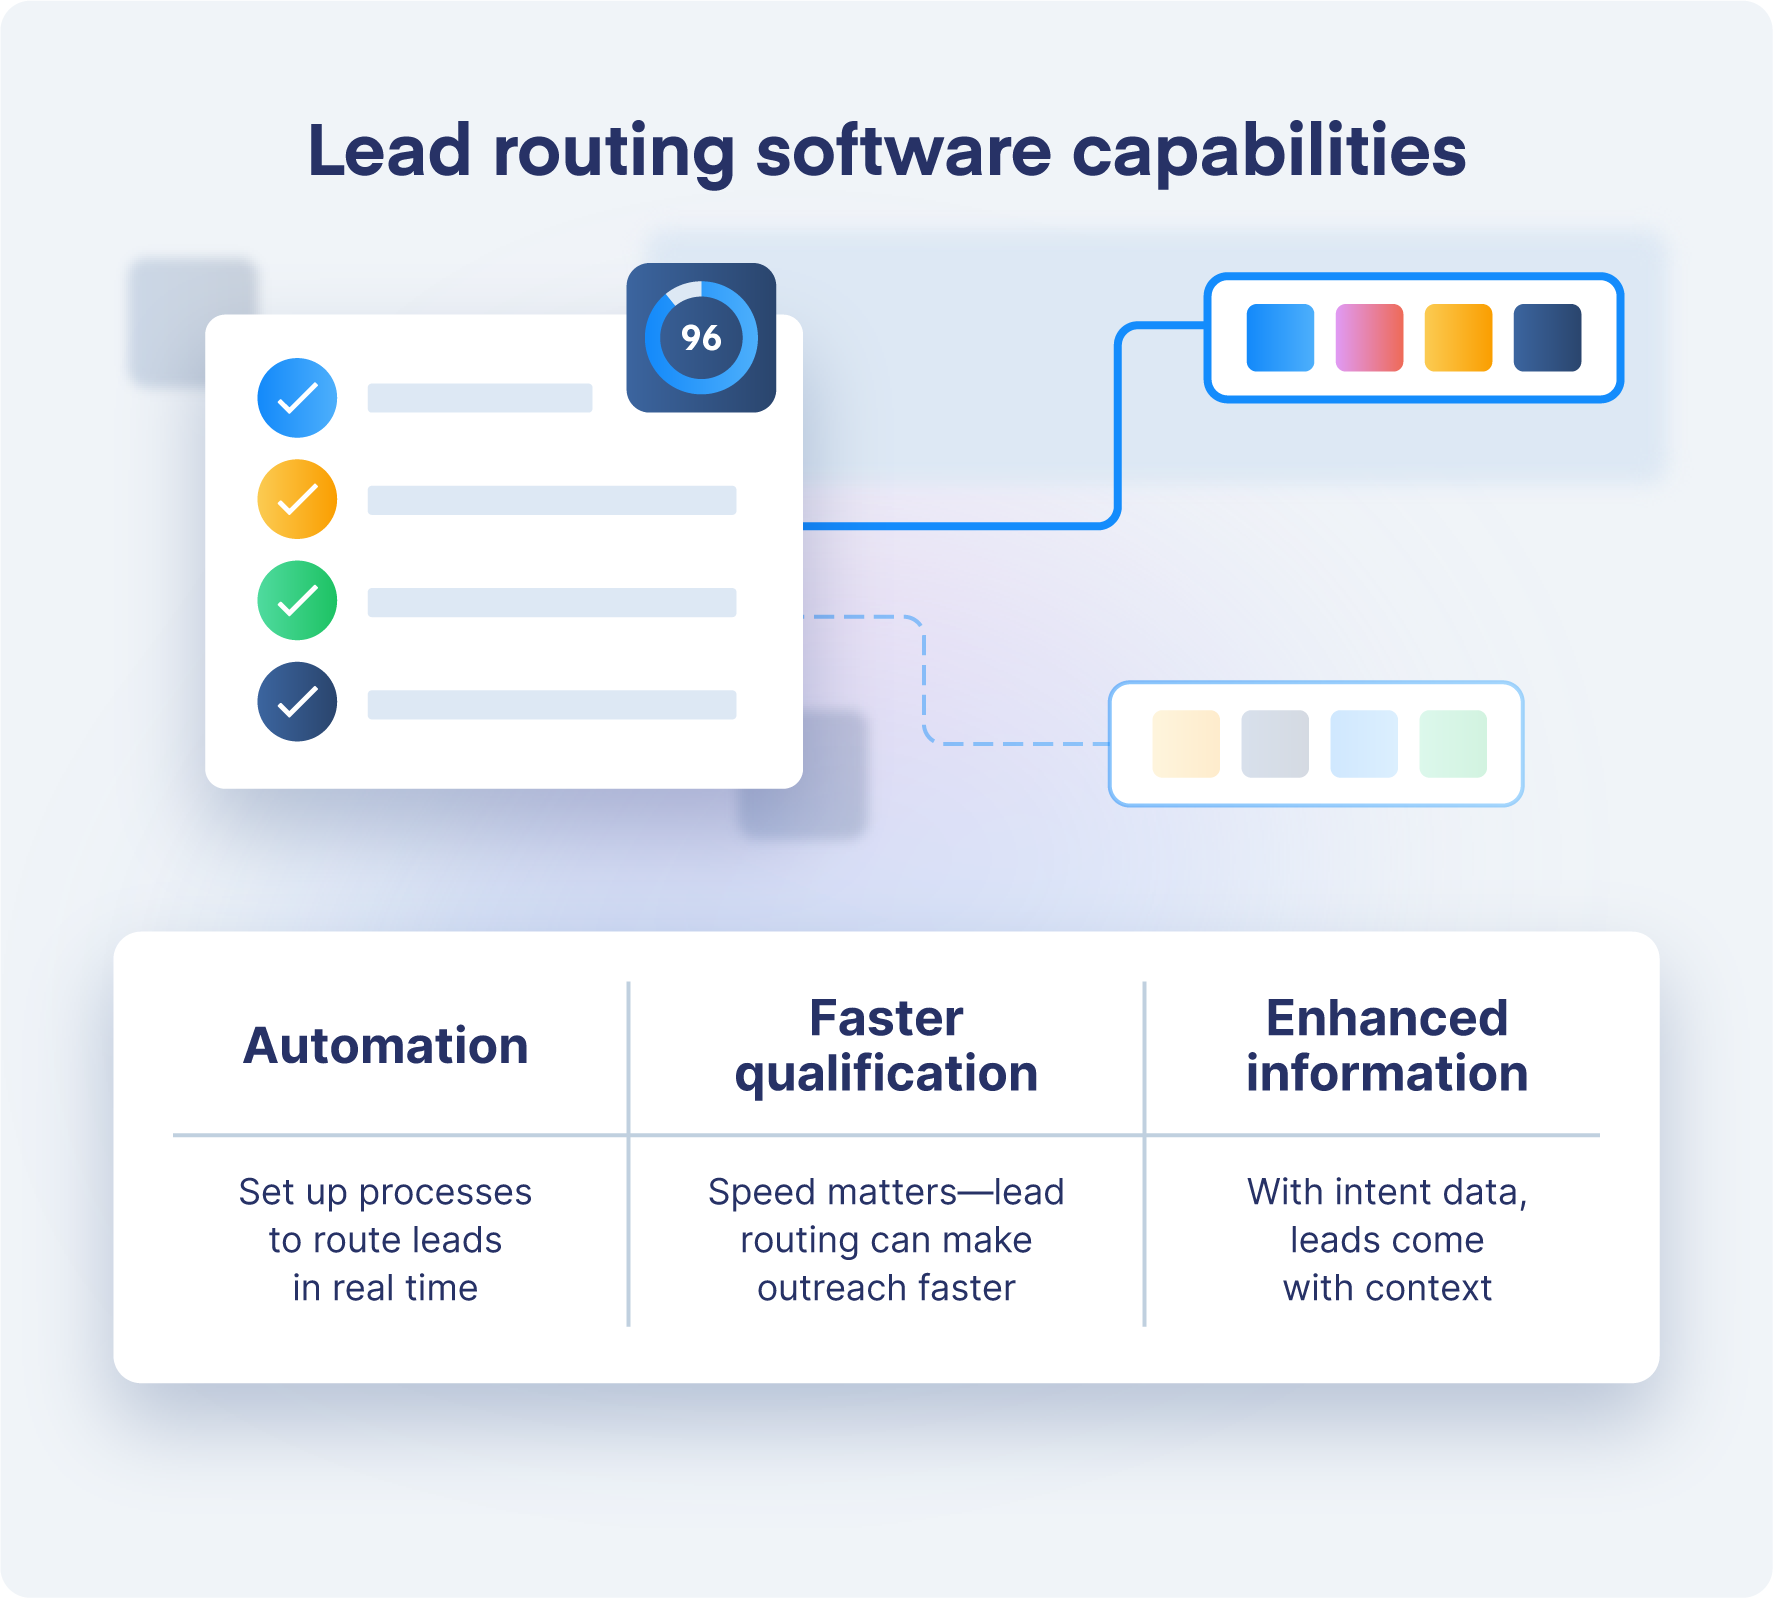 the capabilities of lead routing software